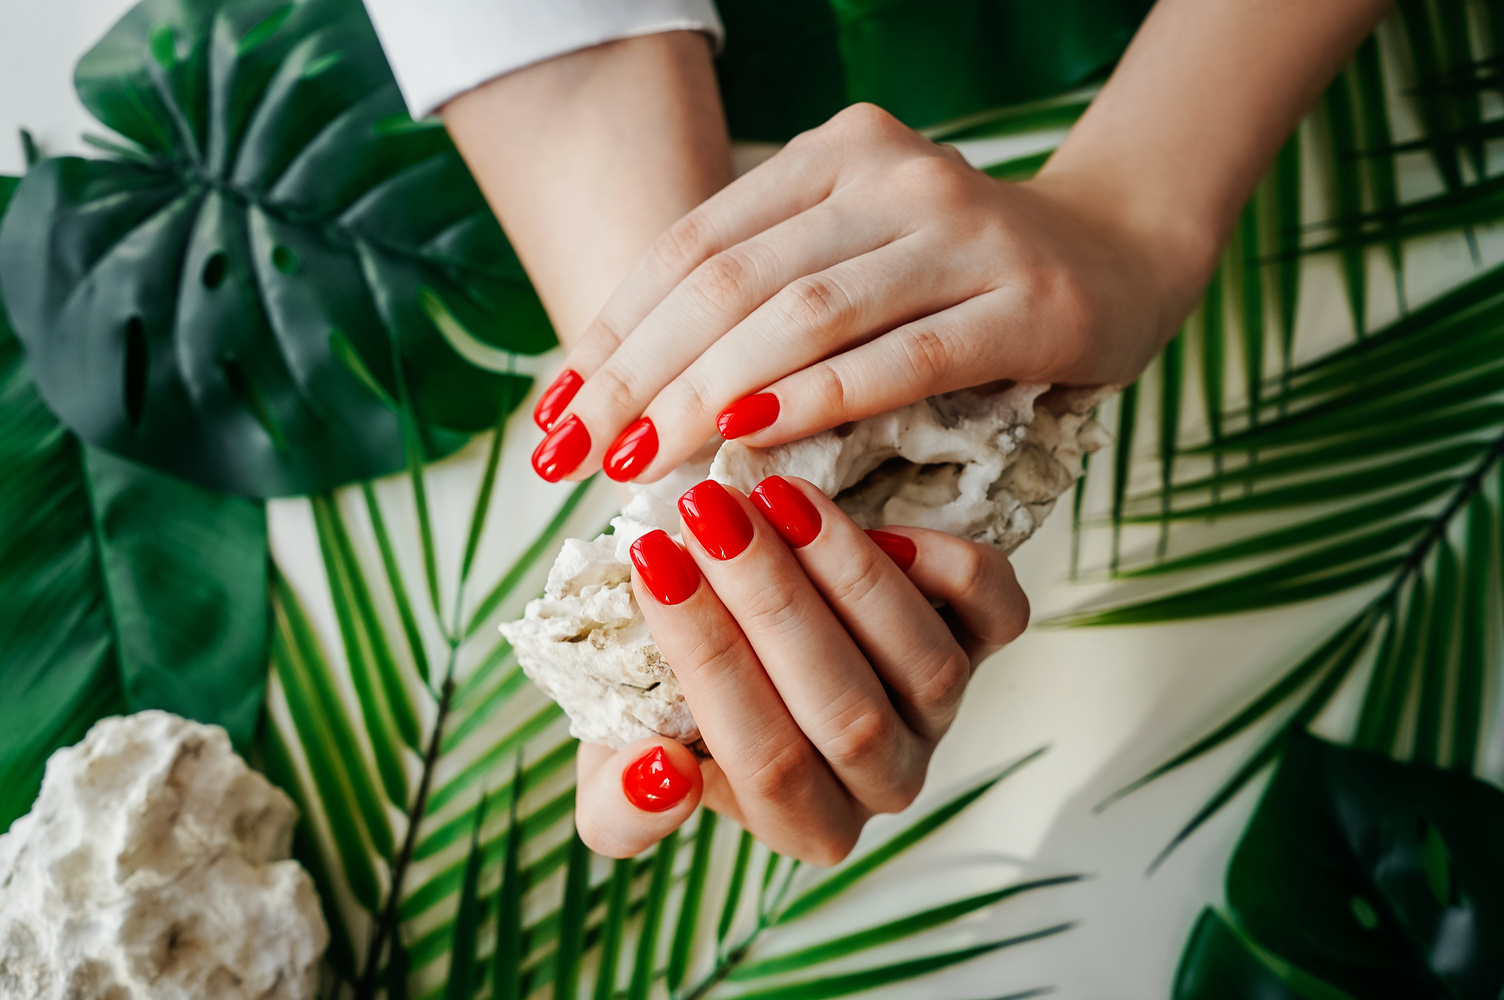 Manicured Woman's Nails with Red Nail Polish.